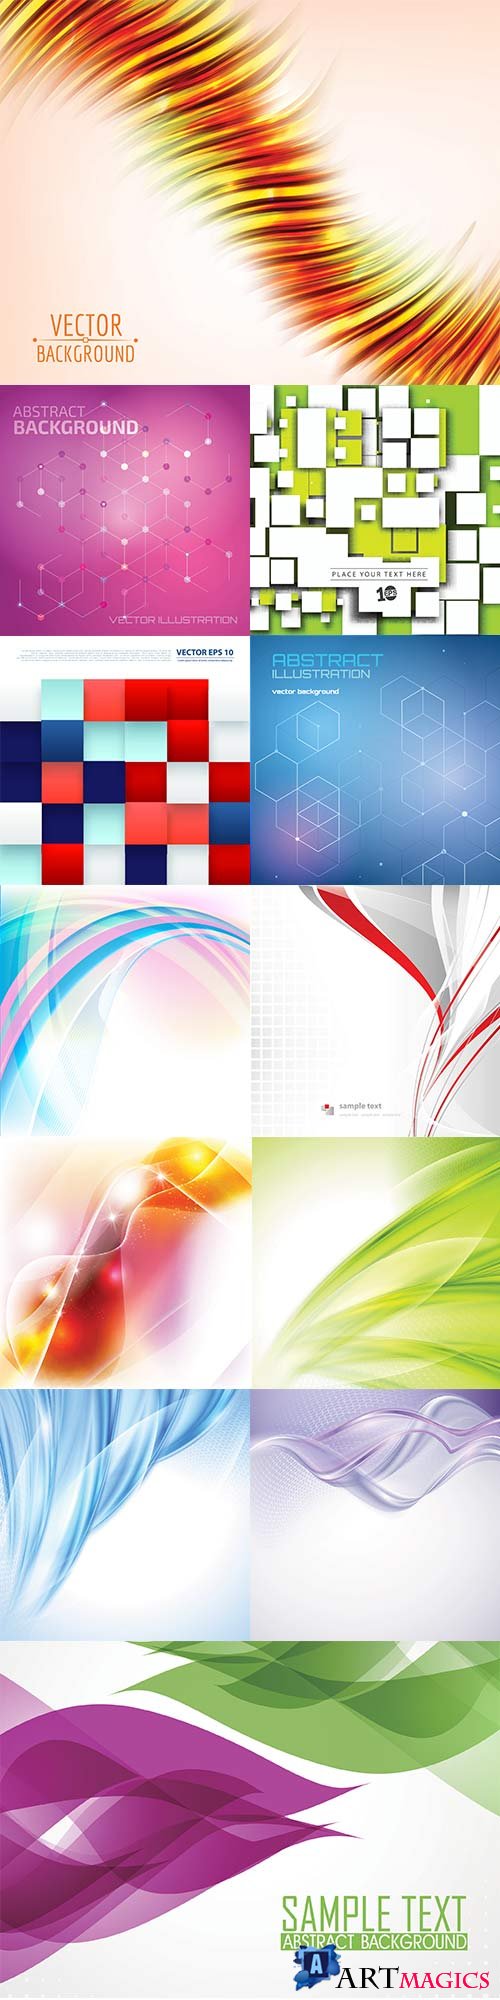 Bright colorful abstract backgrounds vector - 88